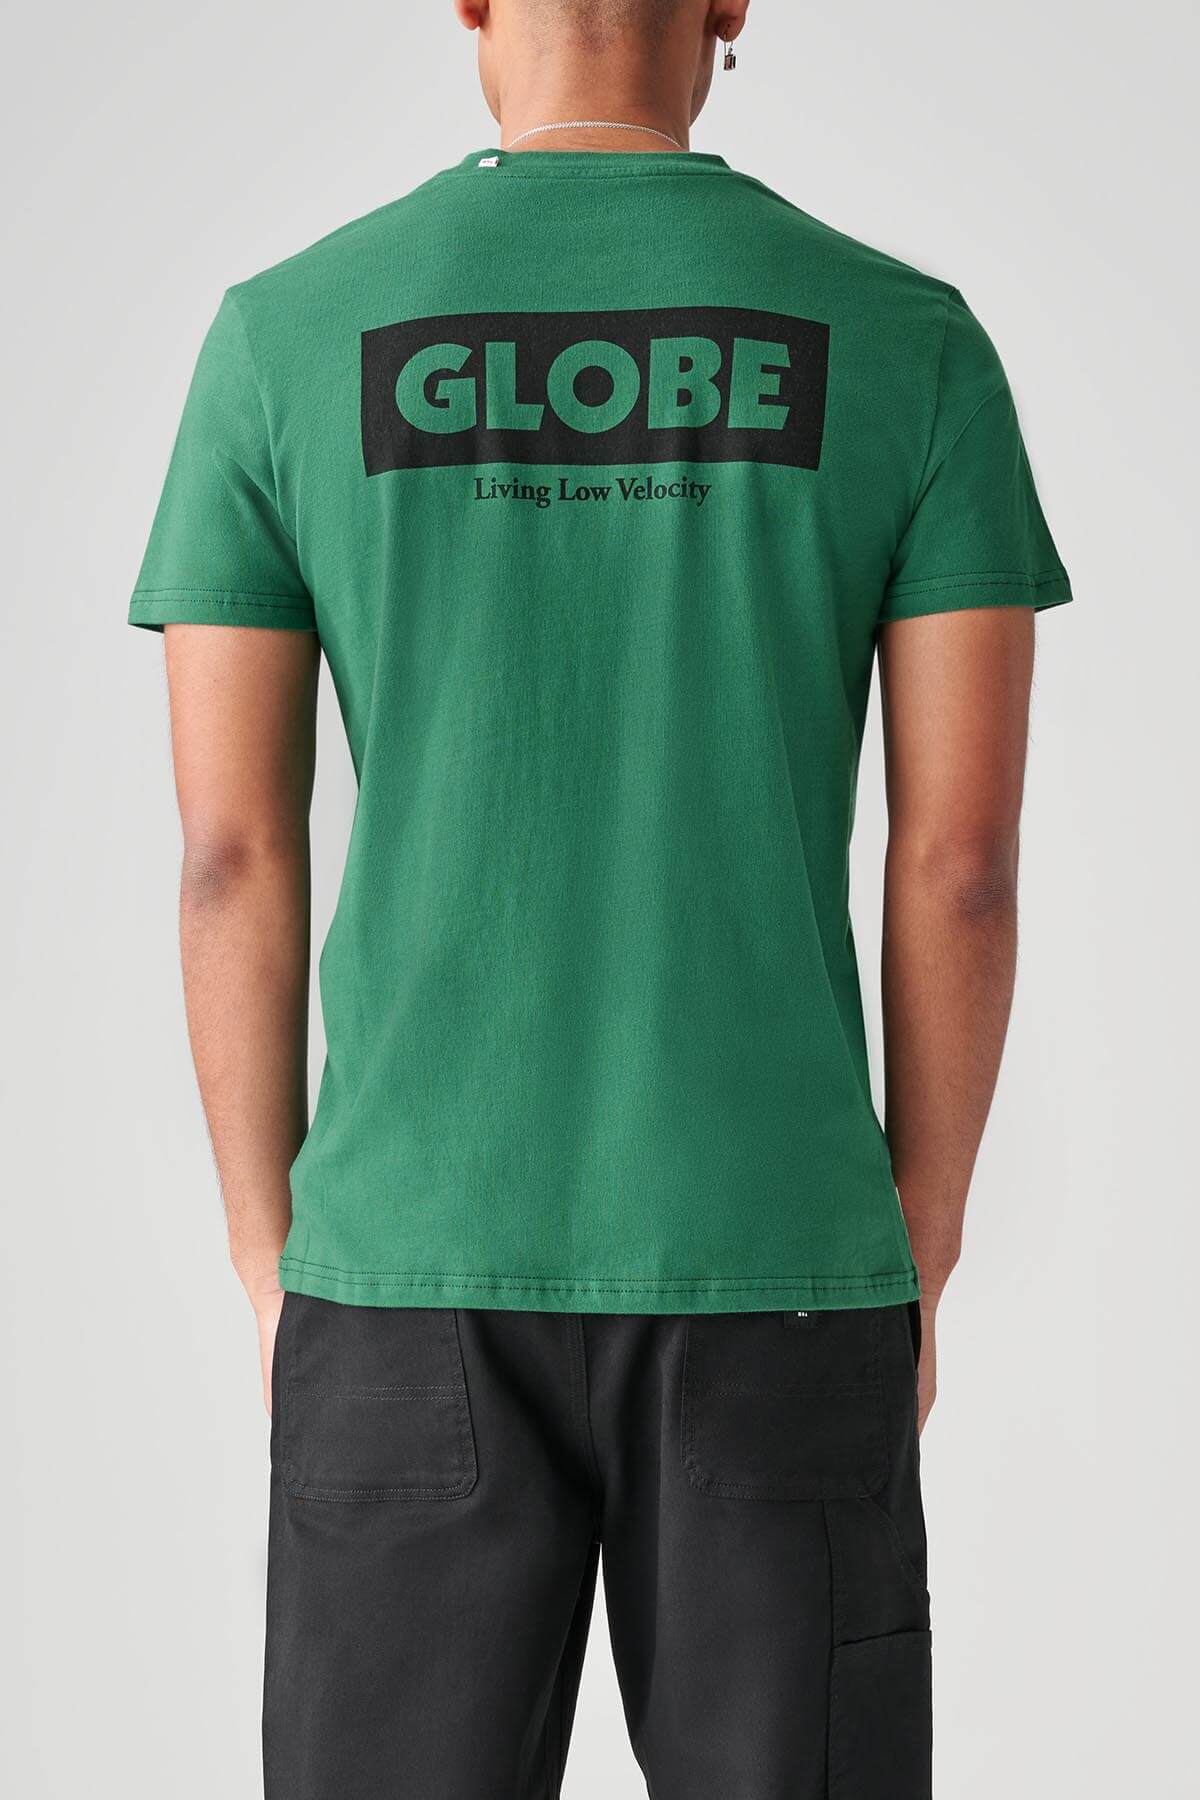 Globe T-SHIRTS S/S Living Low Velocity Tee - Palm in Palm